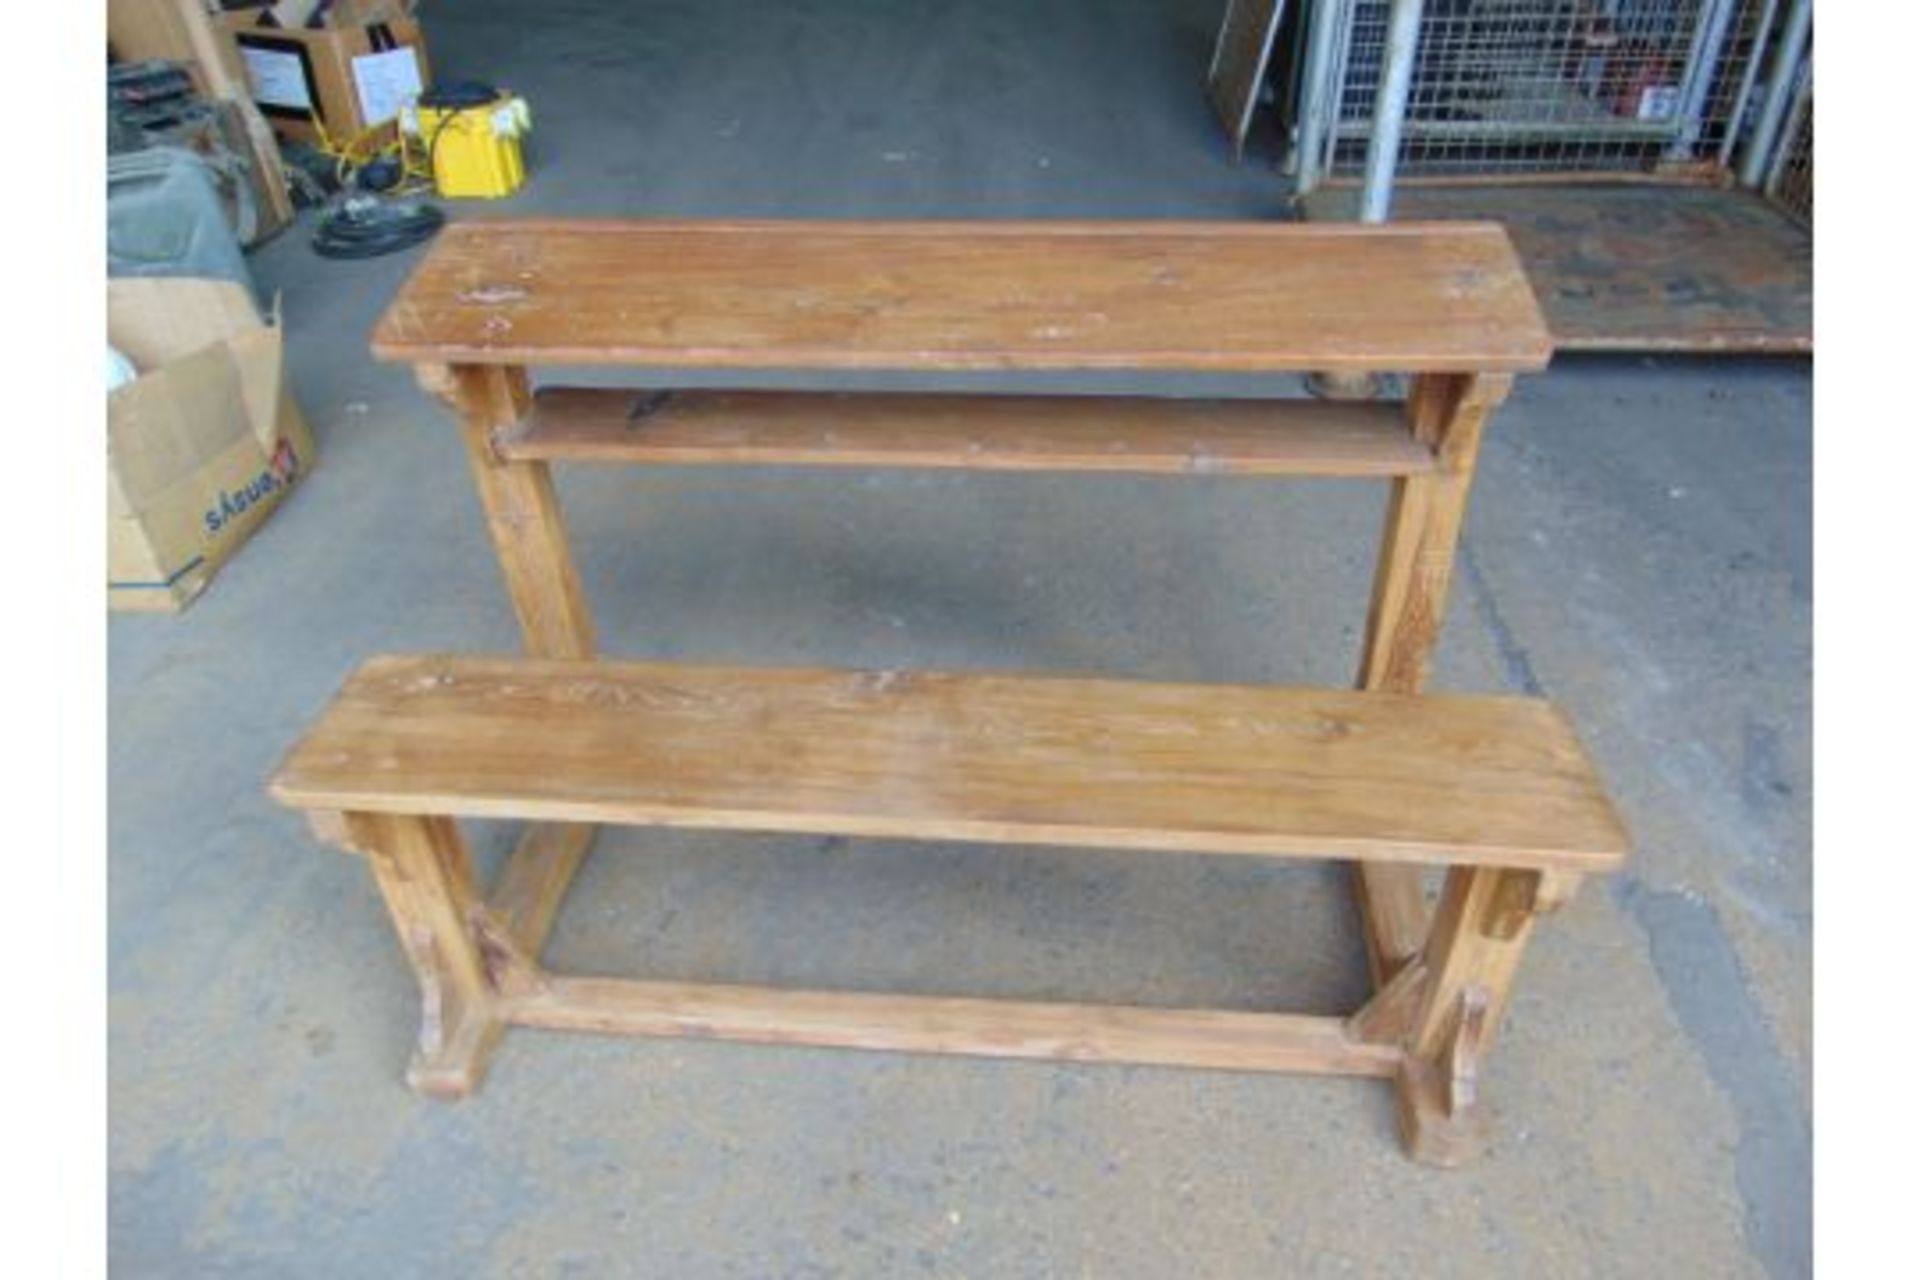 Antique Traditional Wooden School Bench Desk - Image 2 of 6